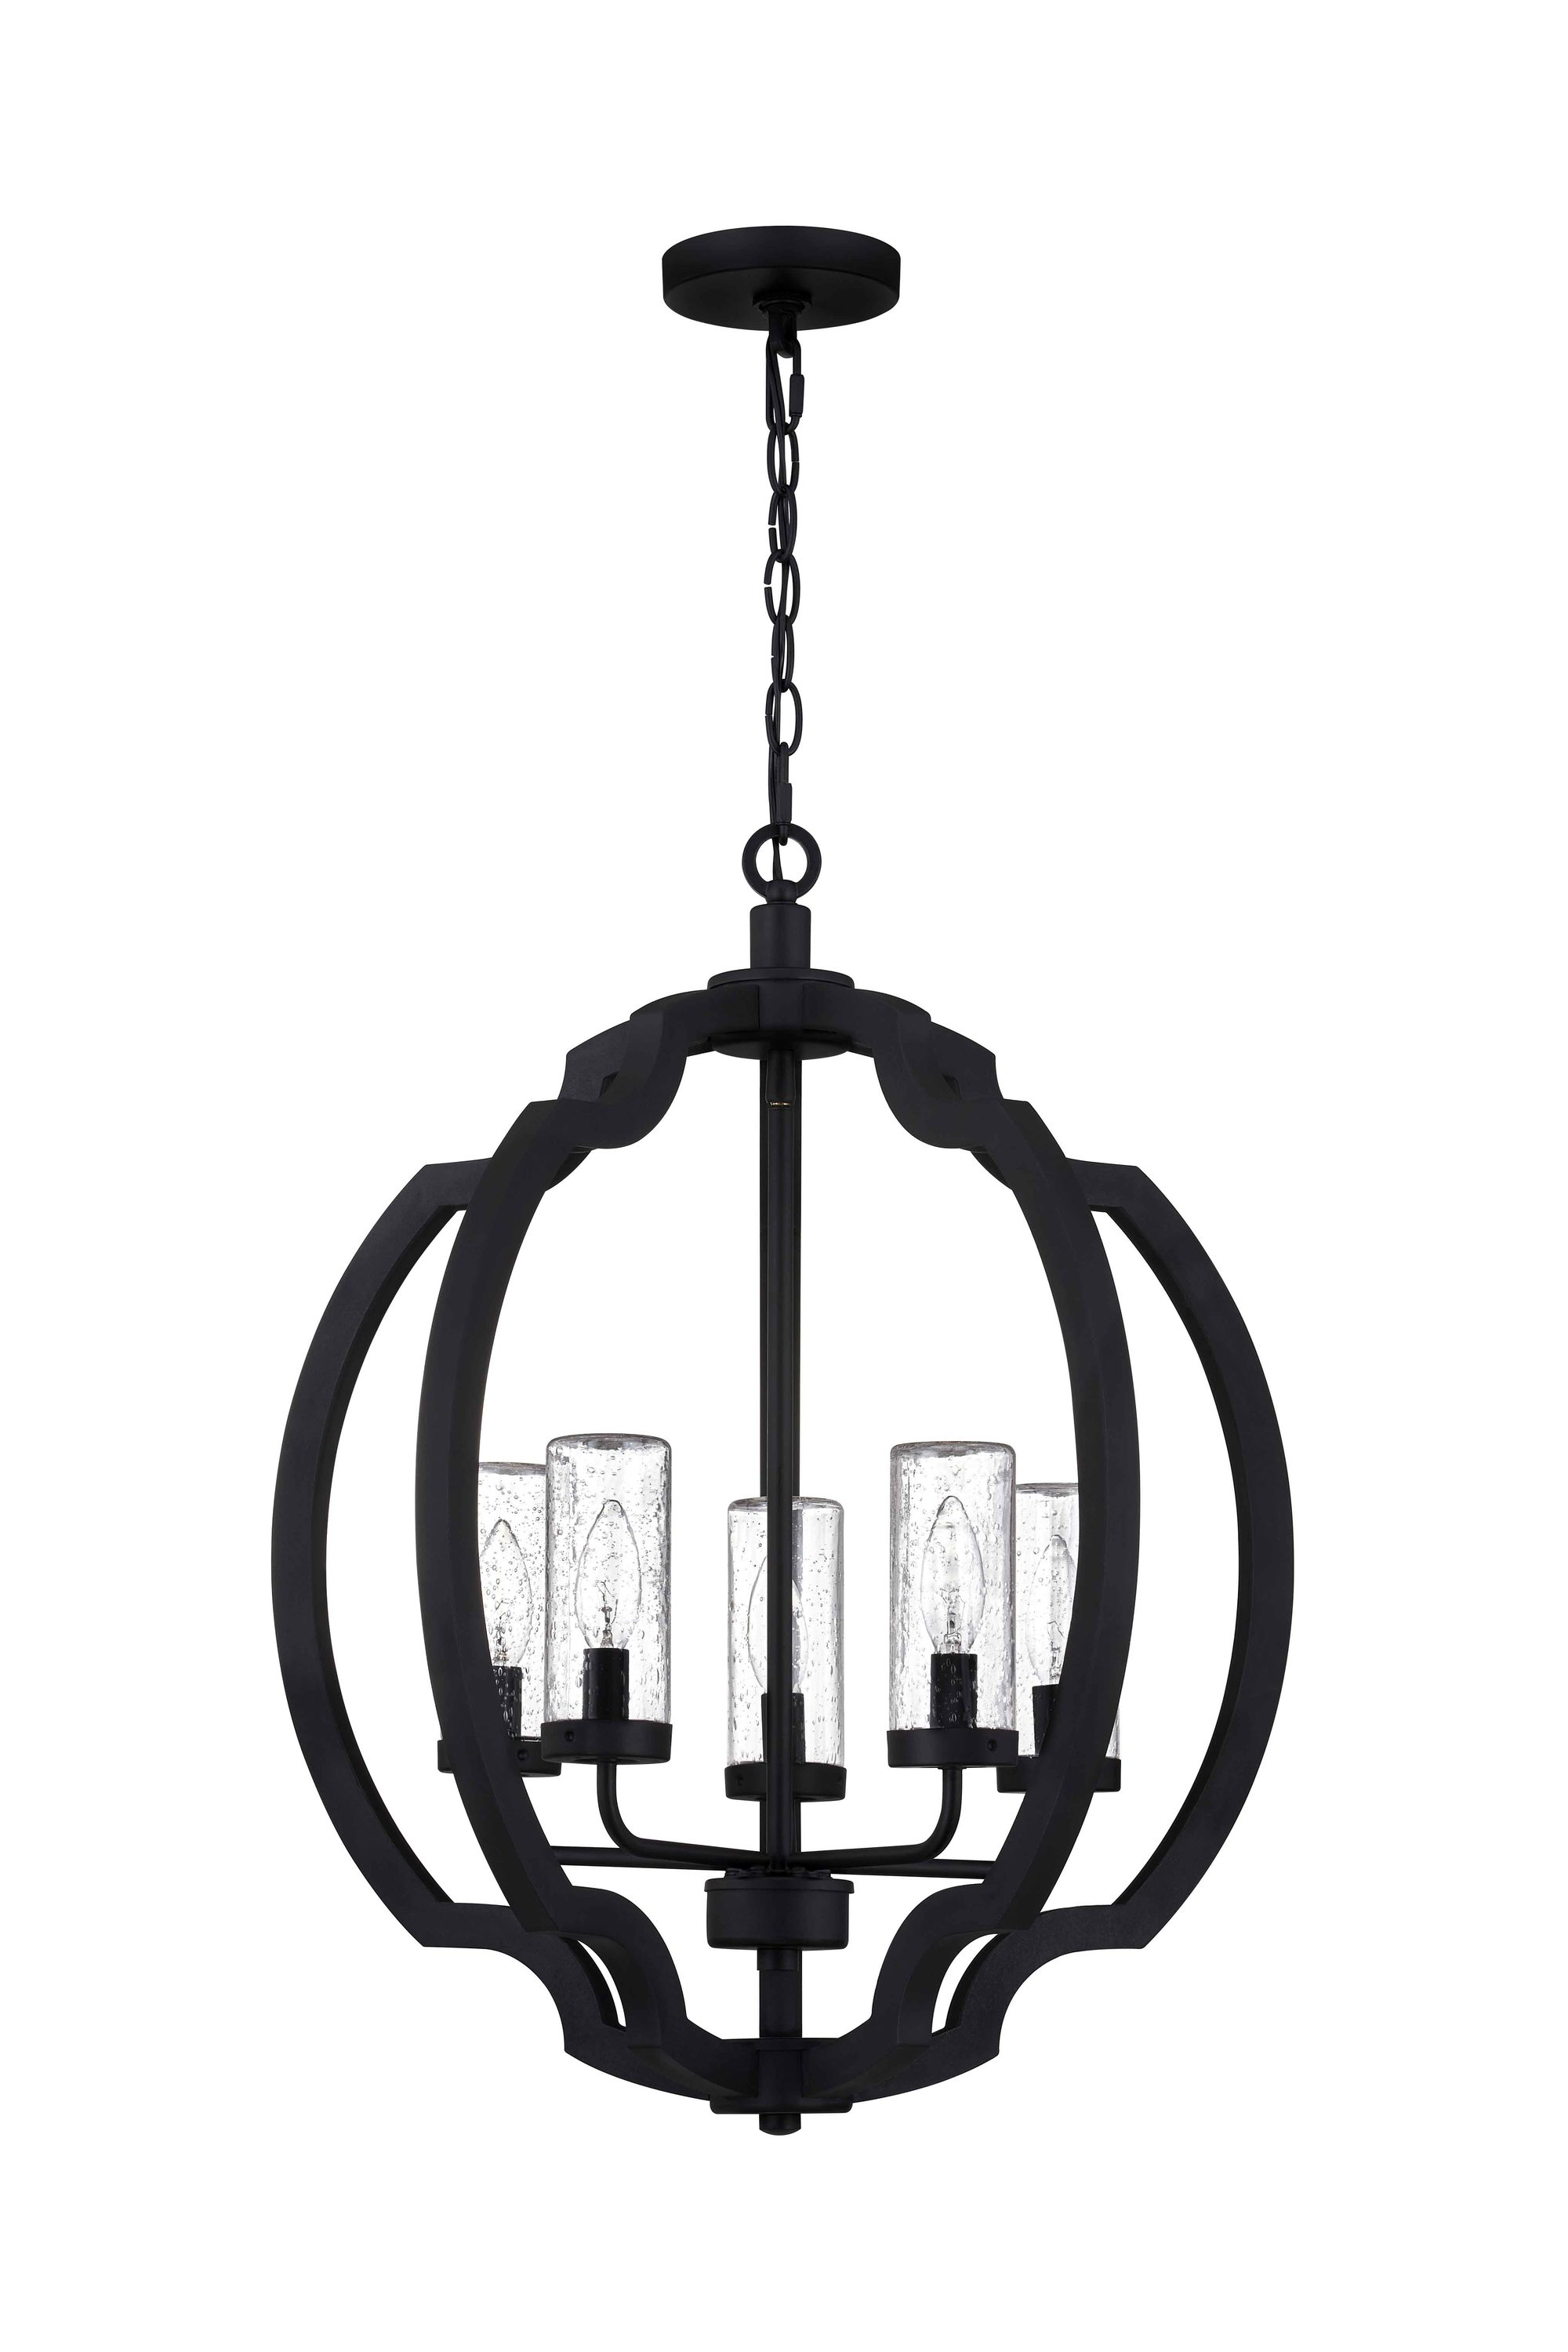 Lav en snemand biord disharmoni Quoizel Castleton 5-Light Black Transitional Wet Rated Outdoor Chandelier  in the Chandeliers department at Lowes.com